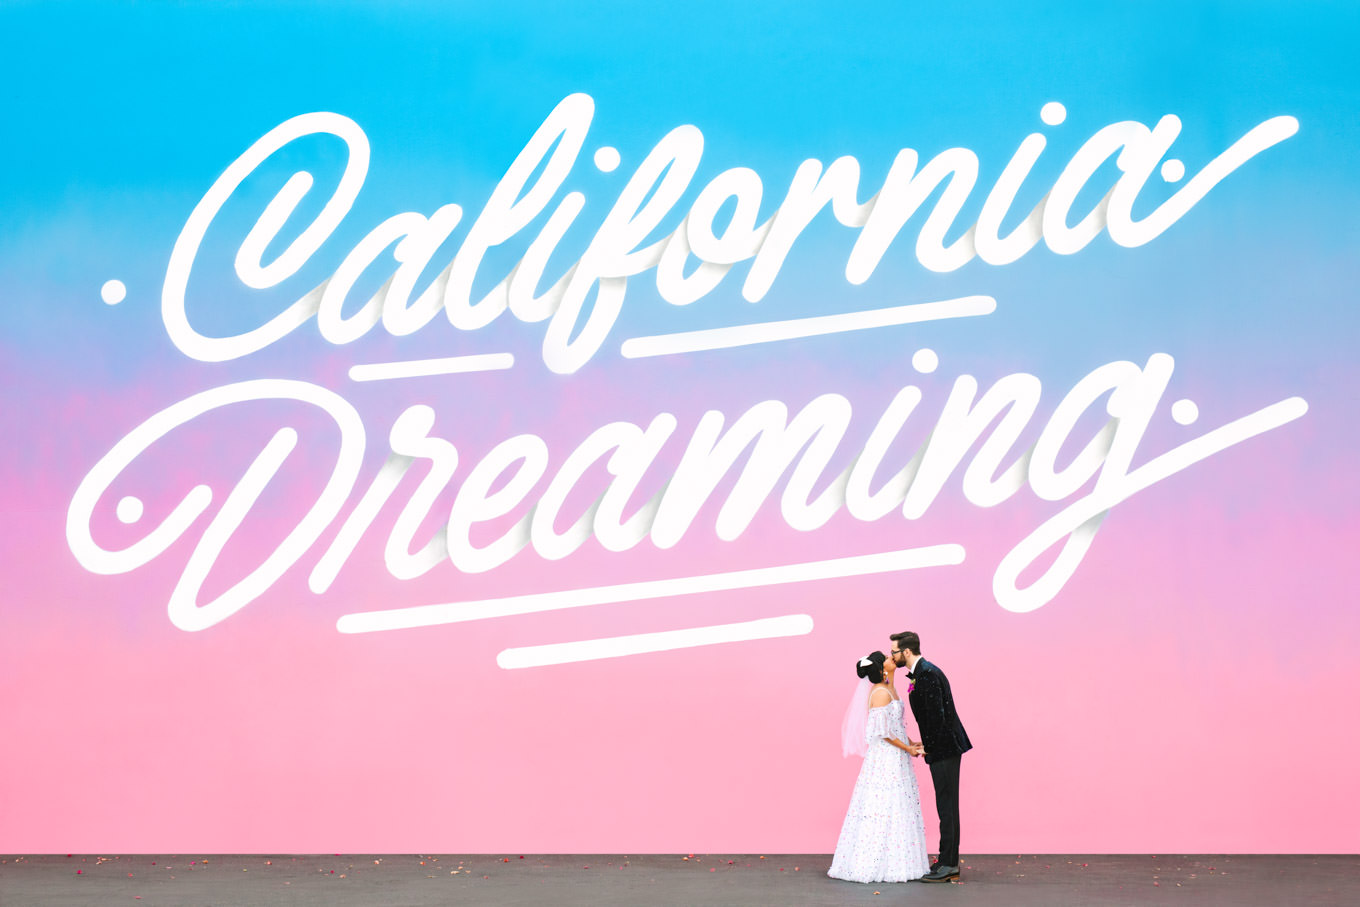 California Dreaming mural elopement | Engagement, elopement, and wedding photography roundup of Mary Costa’s favorite images from 2020 | Colorful and elevated photography for fun-loving couples in Southern California | #2020wedding #elopement #weddingphoto #weddingphotography #microwedding   Source: Mary Costa Photography | Los Angeles